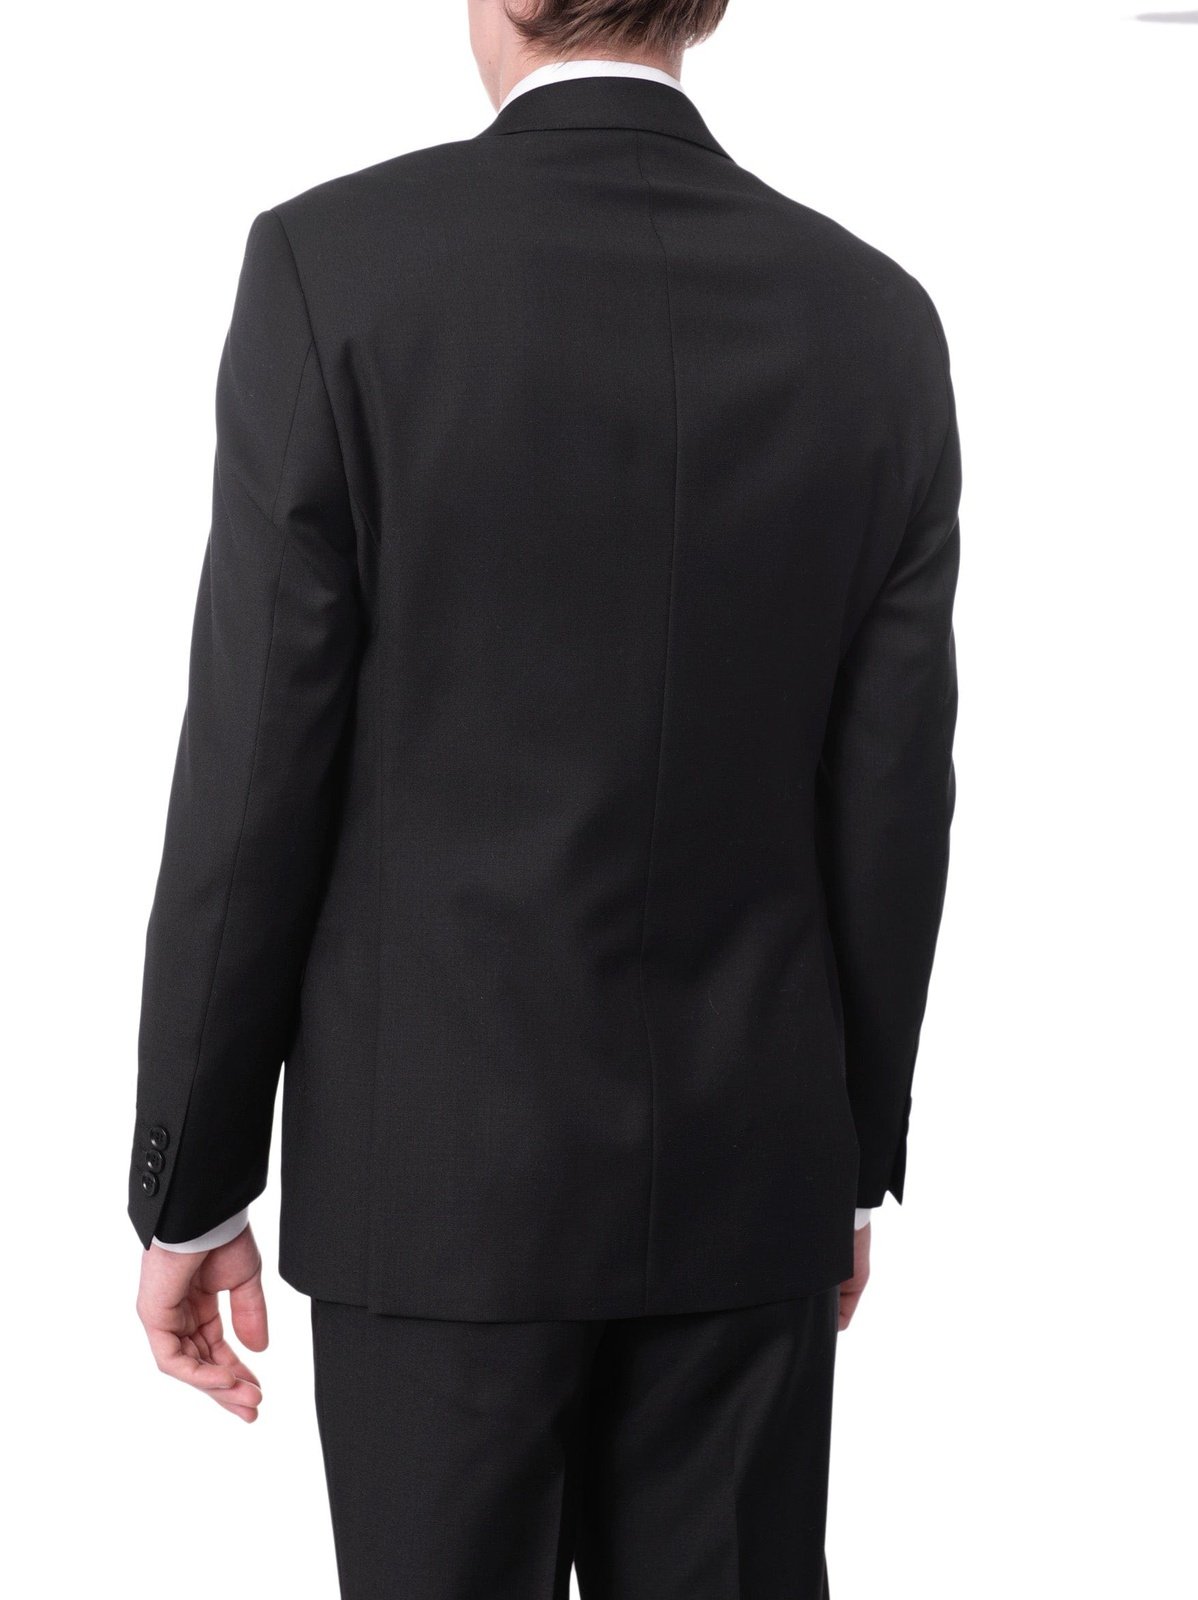 Label M Bestselling Items Men&#39;s Euro Slim Fit Solid Black Two Button 2 Piece 100% Wool Suit